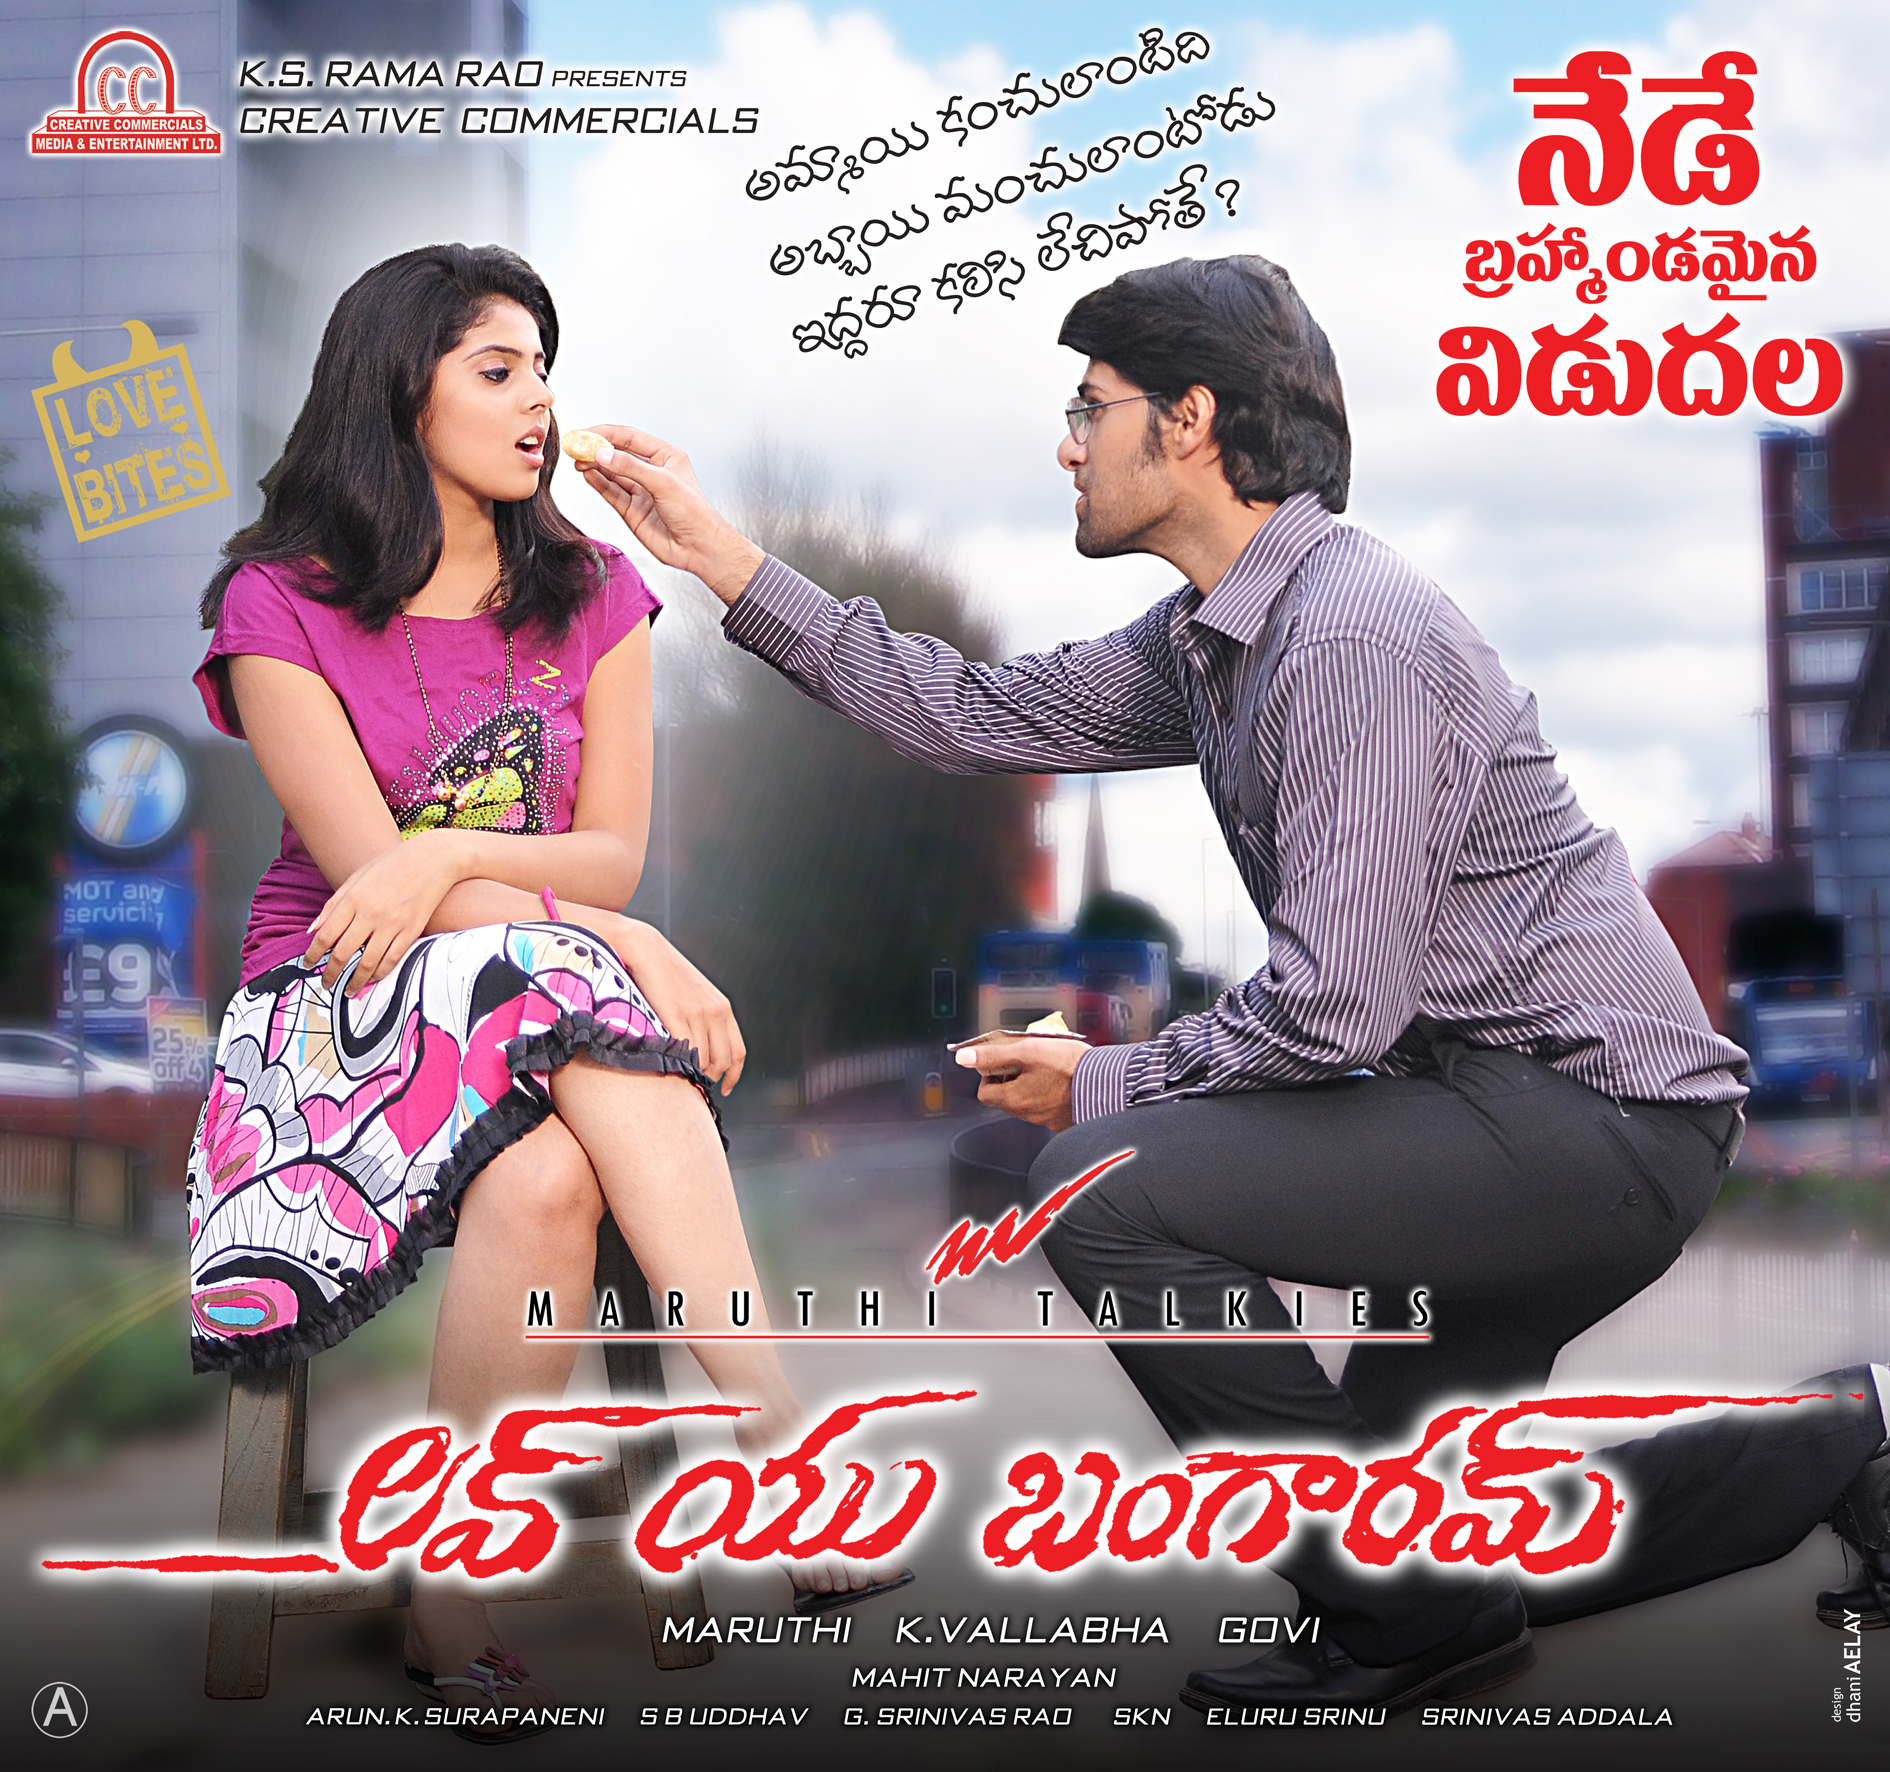 Love you bangara movie wallpapers- Photos,Spicy Hot Pics,Images,High Resolution WallPapers Download